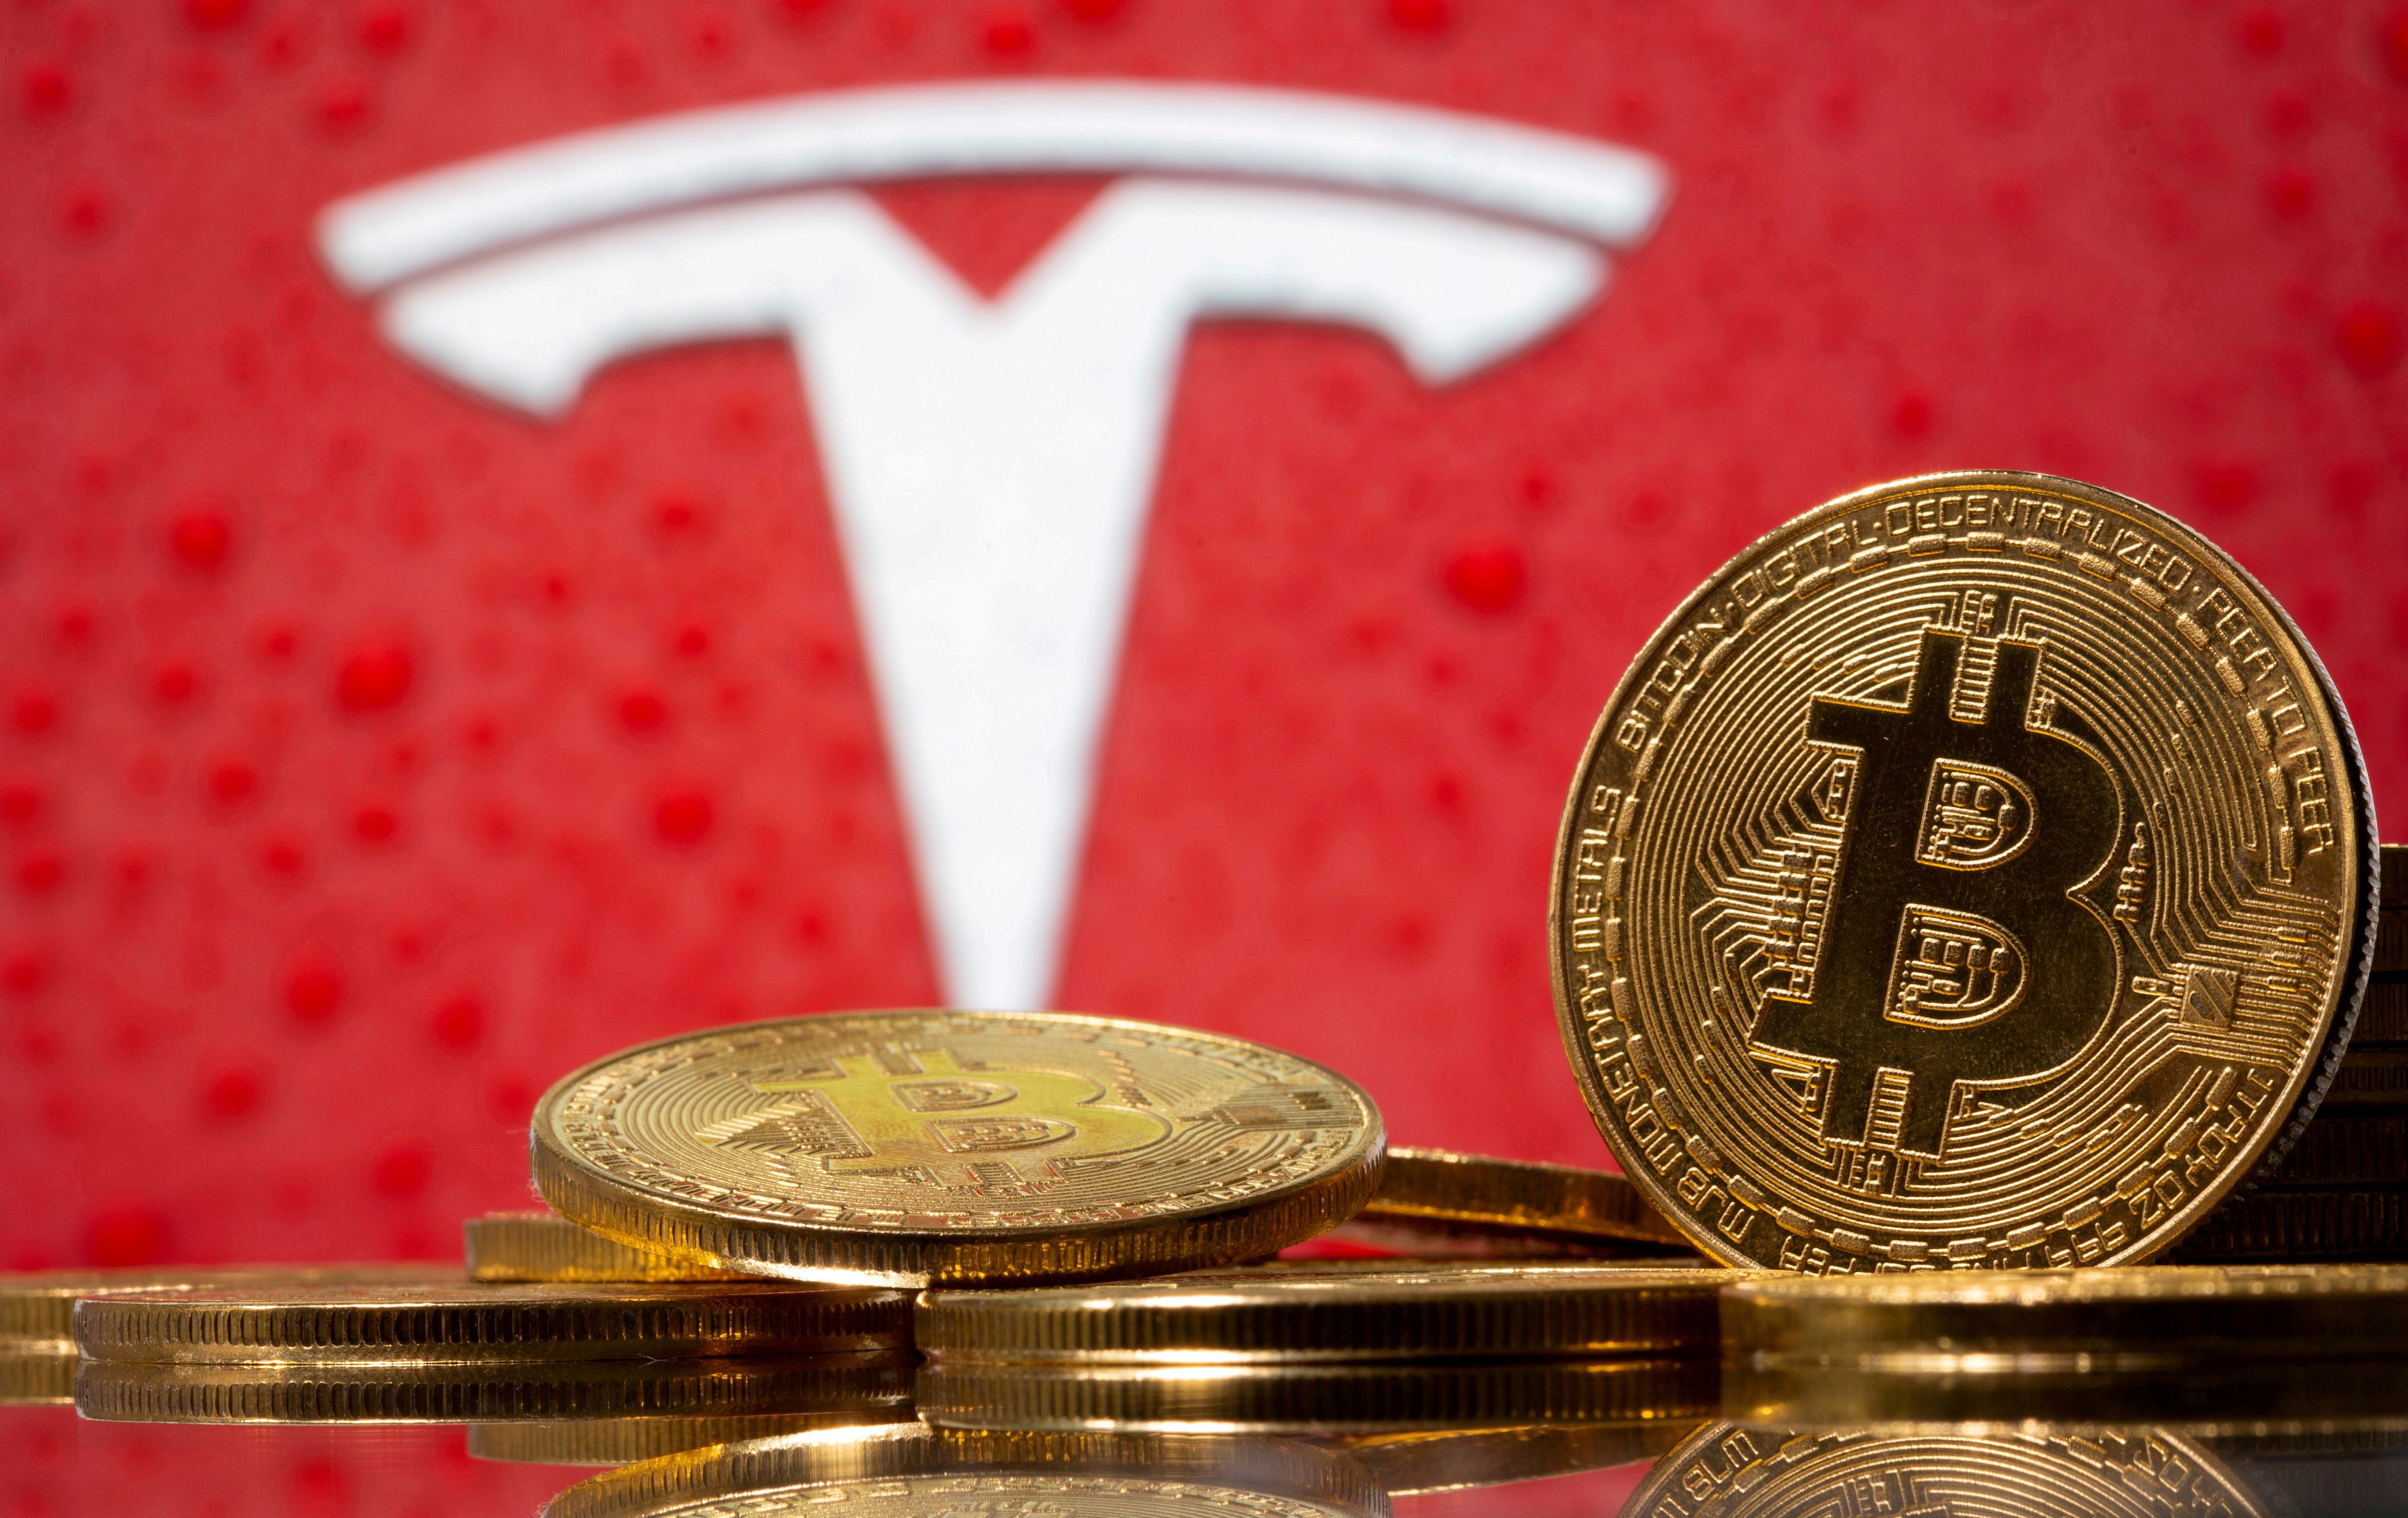 Representations of virtual currency bitcoin are seen in front of Tesla logo in this illustration